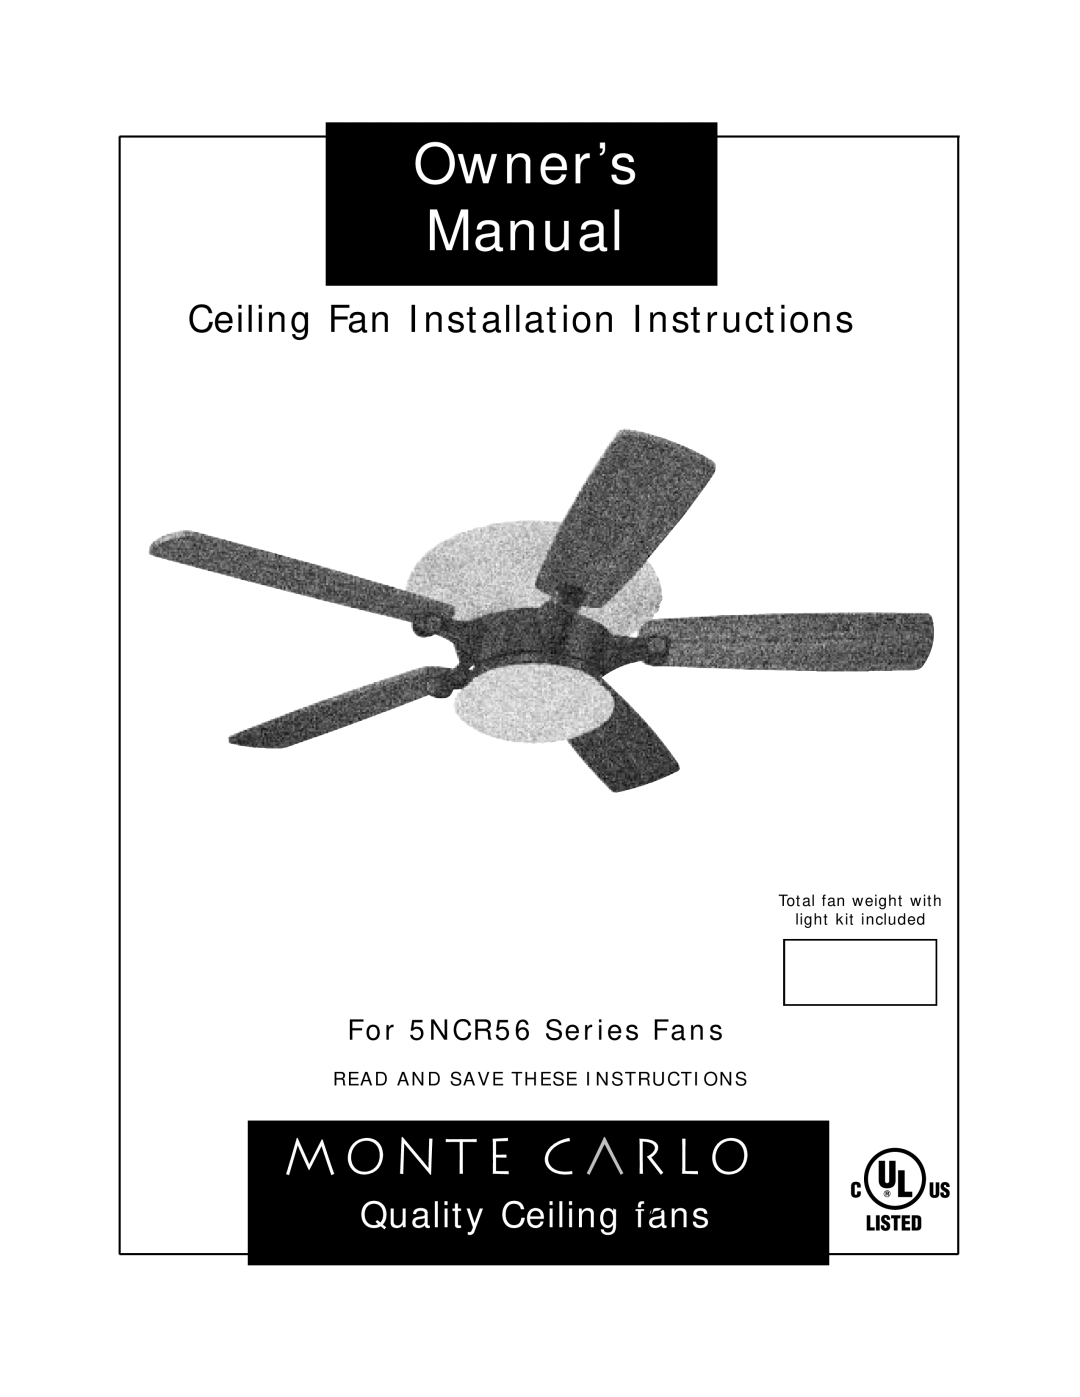 Monte Carlo Fan Company 5NCR56 owner manual Read And Save These Instructions, Ceiling Fan Installation Instructions 